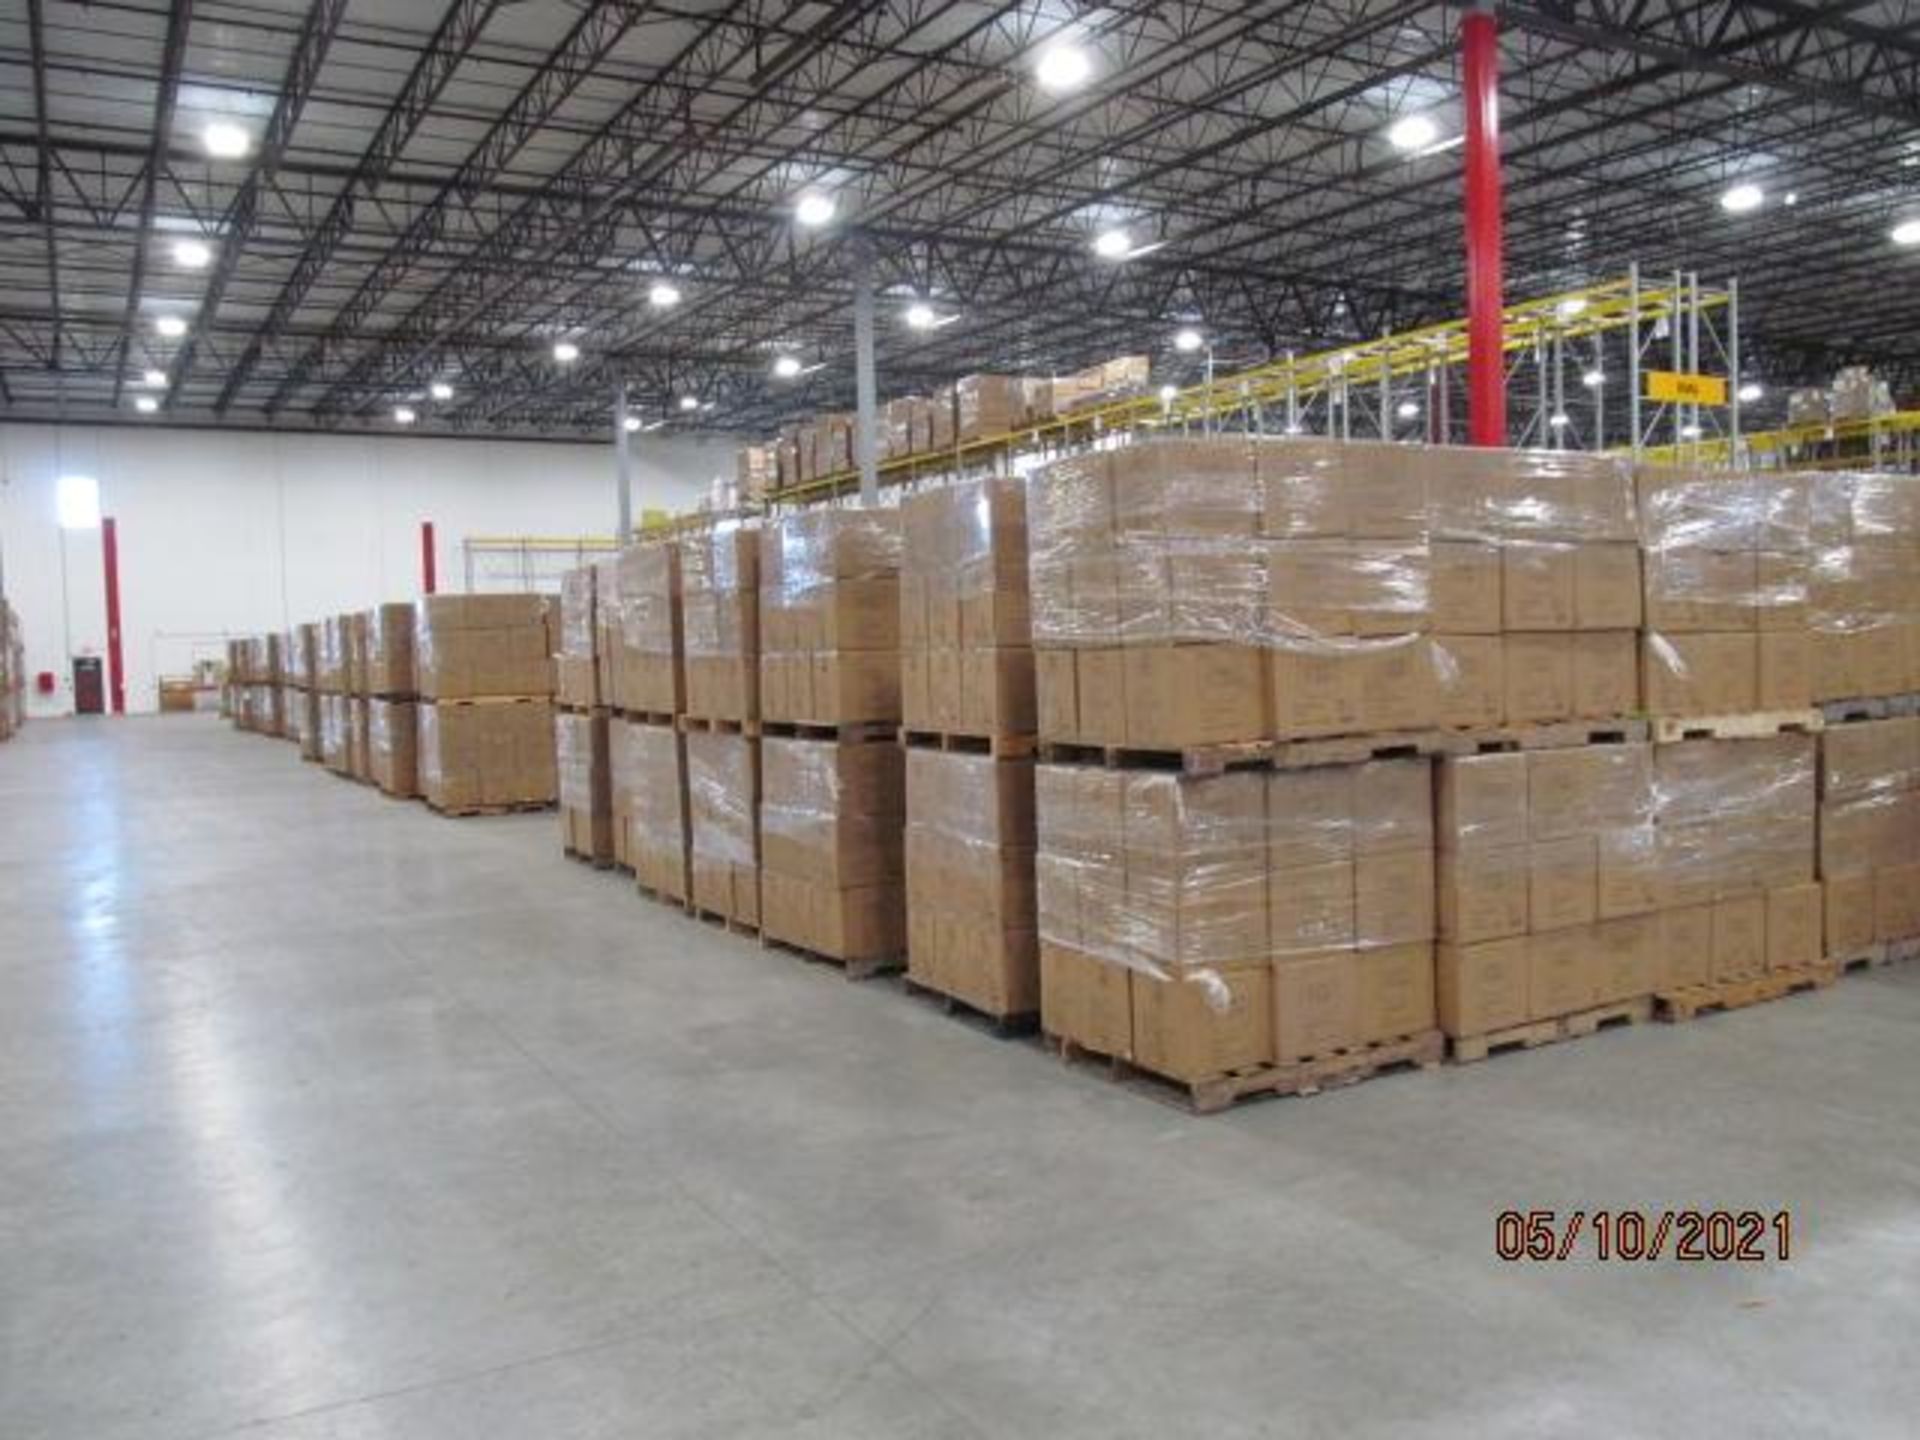 Lot of Waxman Kleen Freak Sanitizing Wipes consisting of 134,784 packages on 208 pallets. Each packa - Image 10 of 11